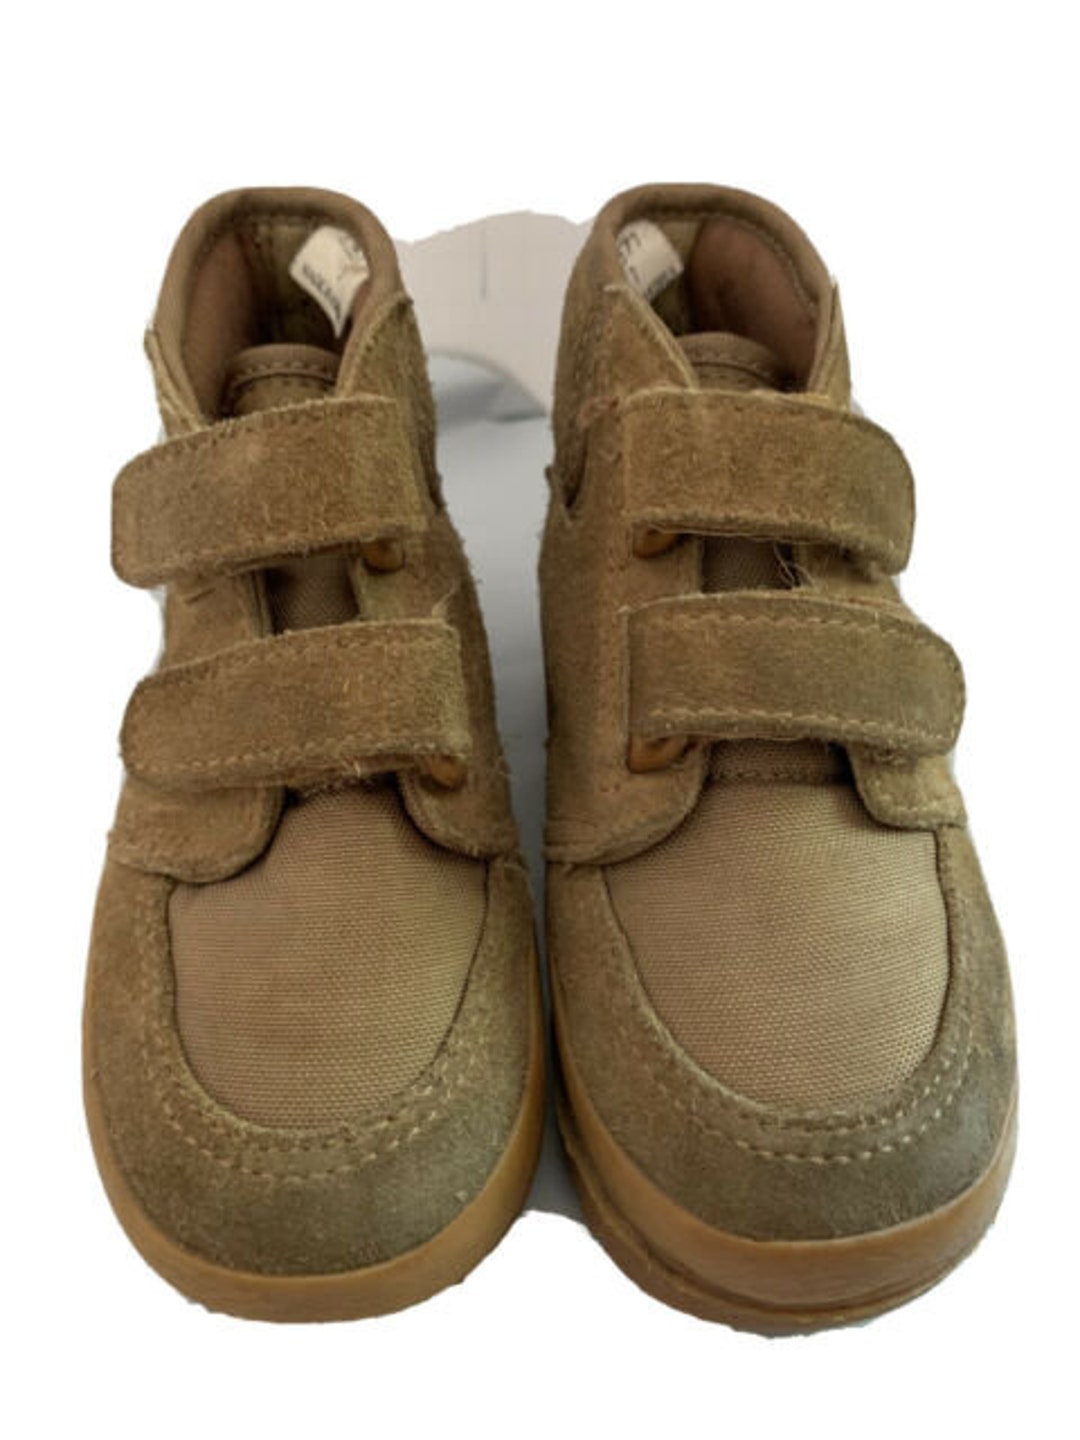 Vintage Boys Toddler Work Boots Kids Shoes Size 7 Youth Canvas Suede ...